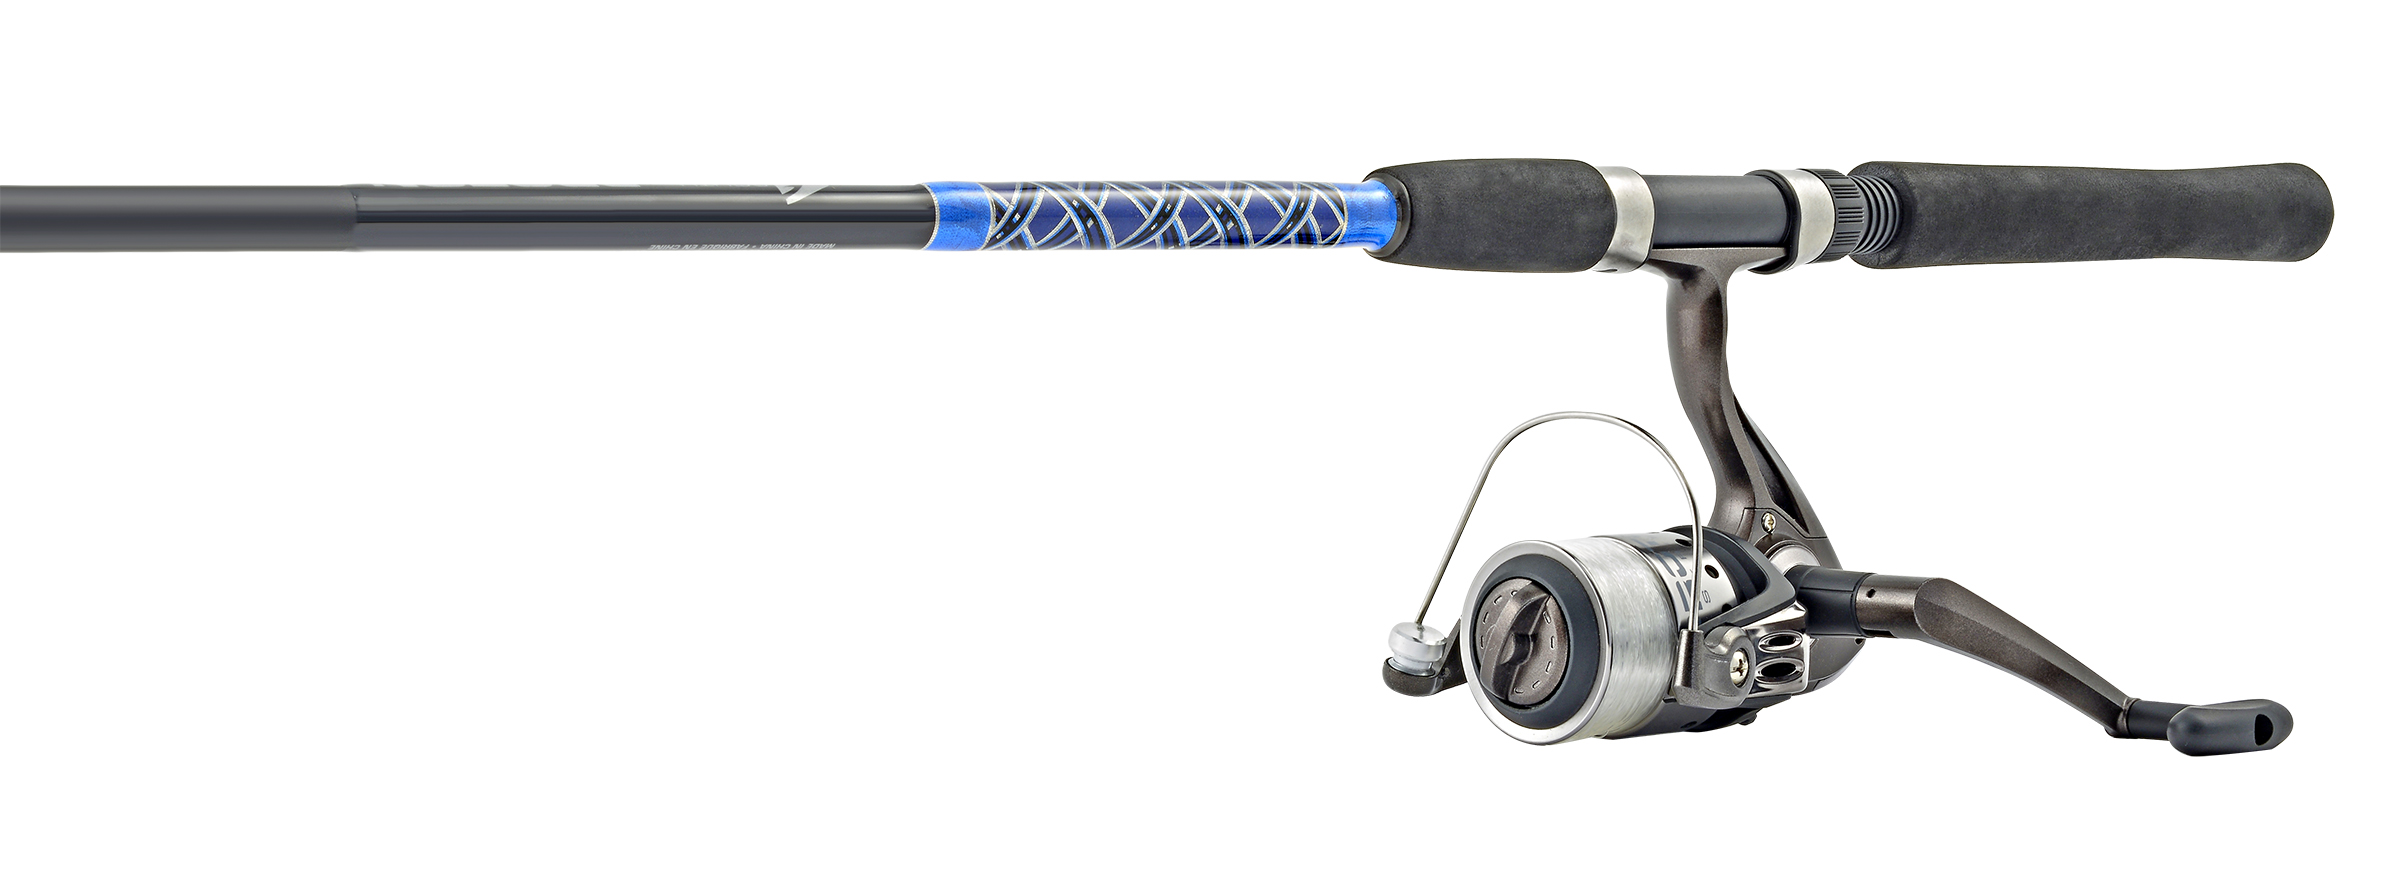 South Bend 6'6in Proton Spinning Fishing Rod and Reel Combo